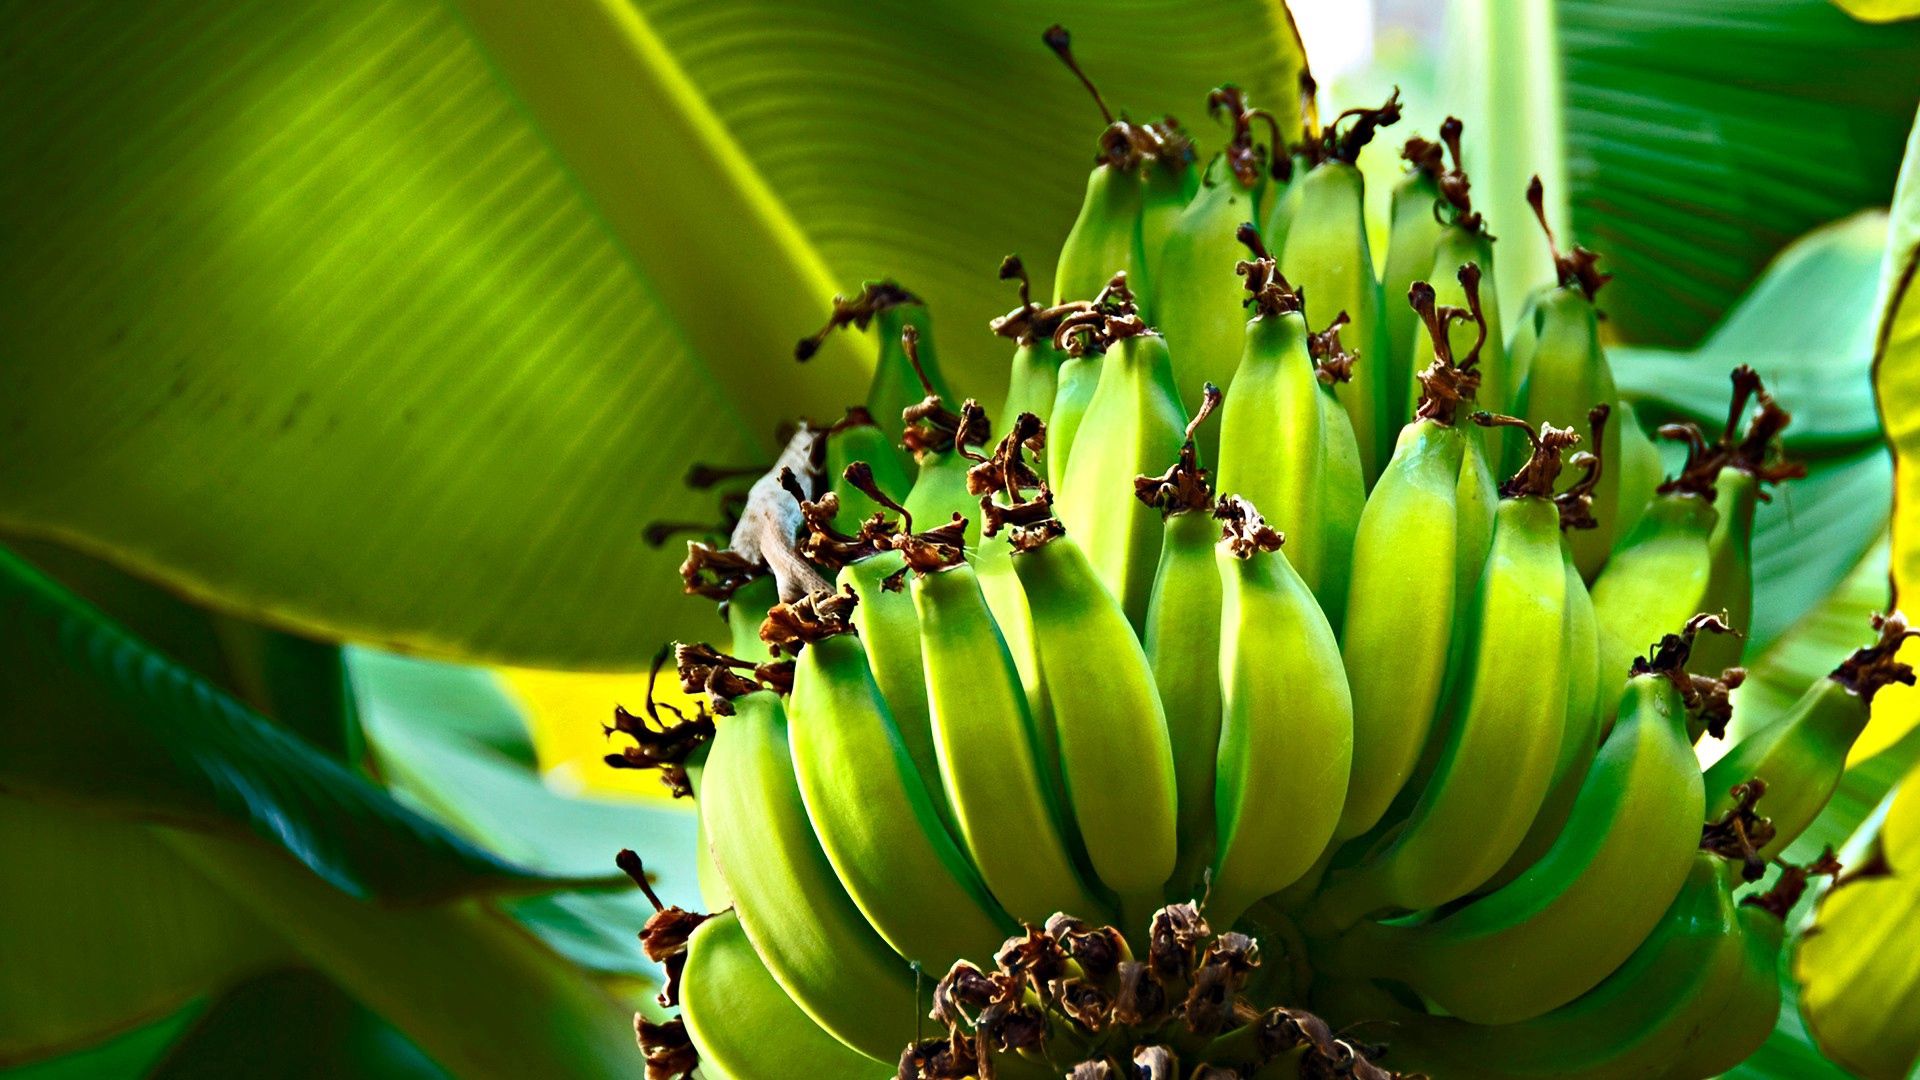 105091 Screensavers and Wallpapers Bananas for phone. Download nature, fruits, bananas, green, wood, tree, fruit pictures for free